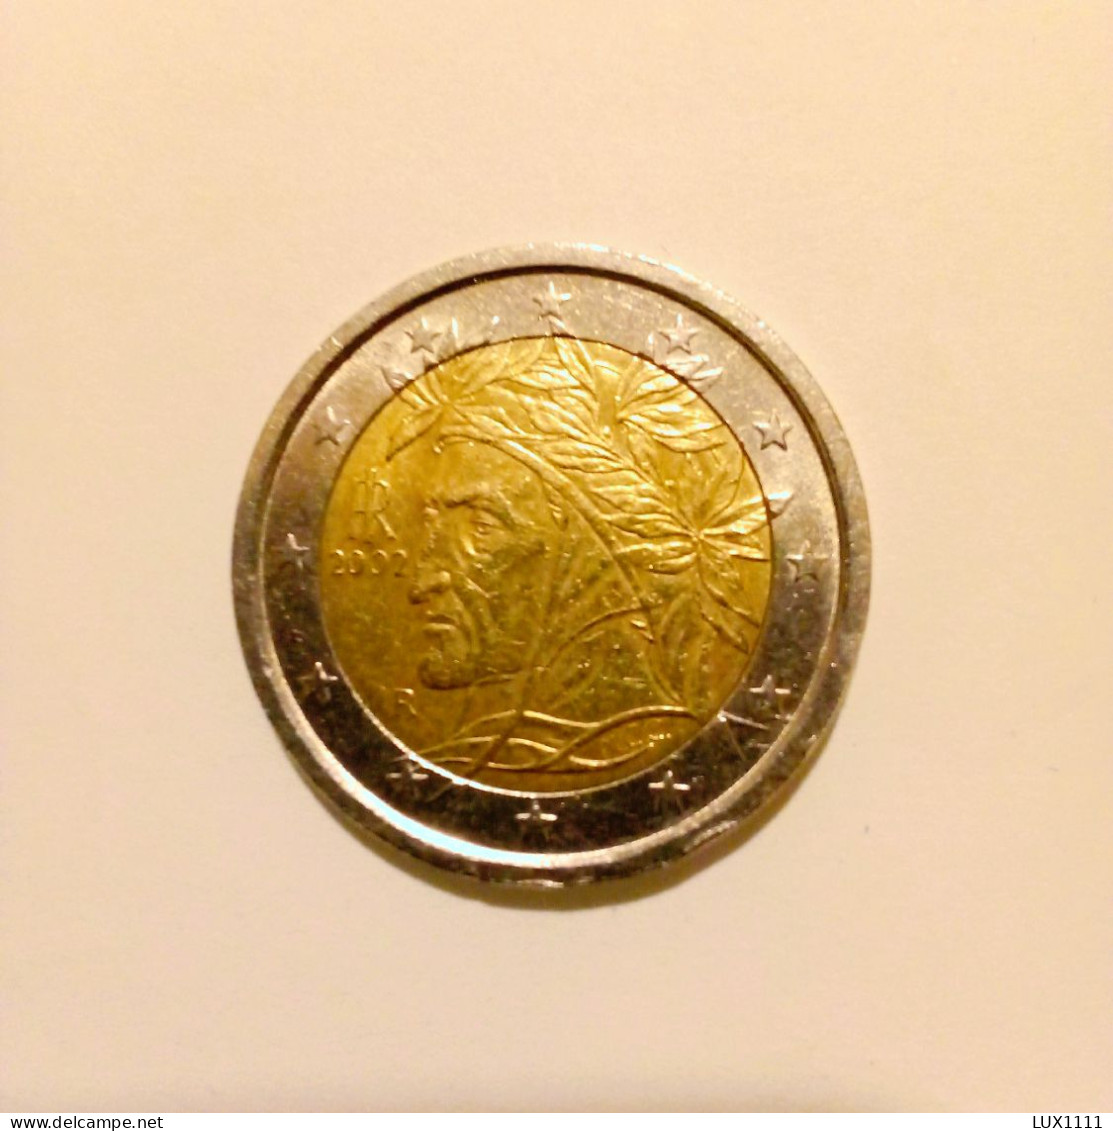 French Coin Year Of Issue 2002 - France